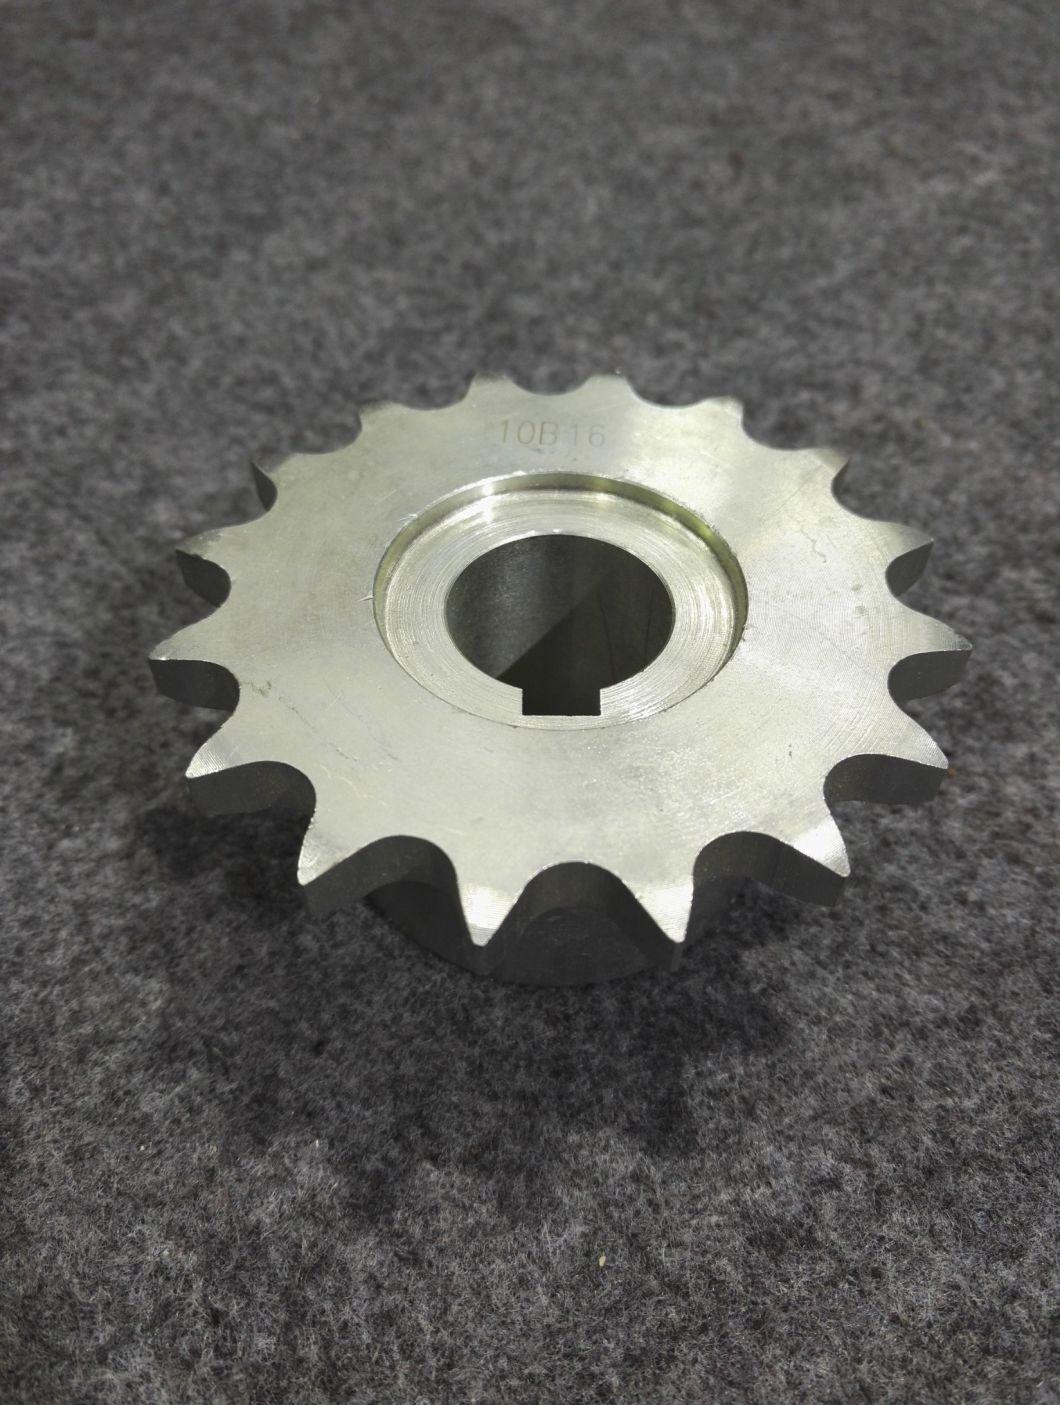 Factory Supply Finished Bore Sprocket Transmission Harden Tooth Stainless Steel Conveyor Drive Roller Chain Idler Wheel Gear Sprocket